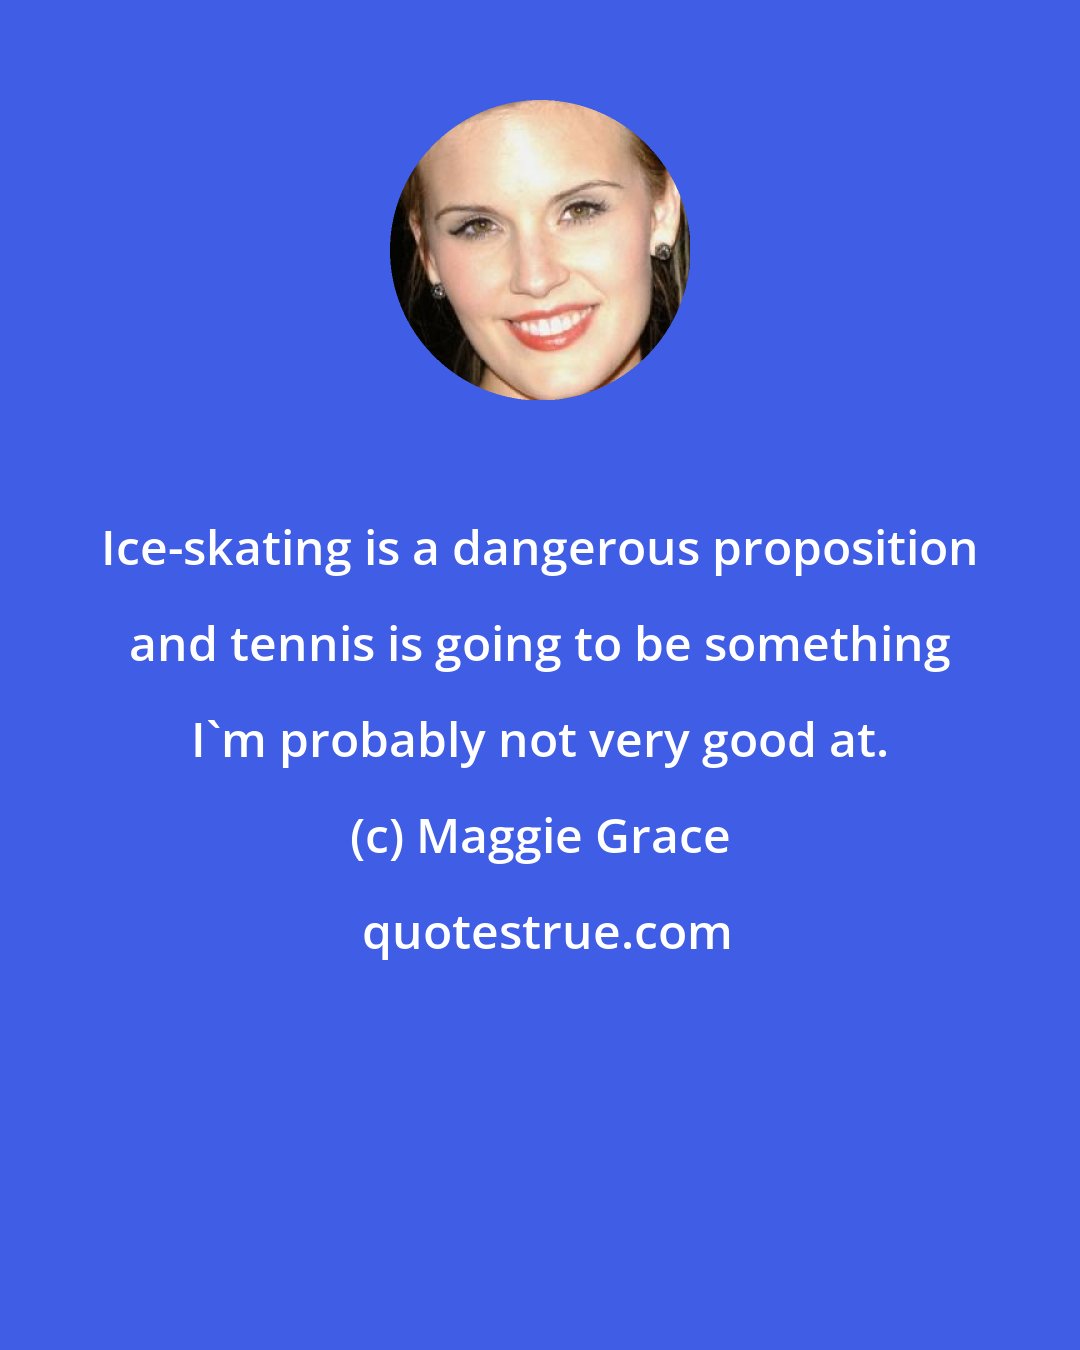 Maggie Grace: Ice-skating is a dangerous proposition and tennis is going to be something I'm probably not very good at.